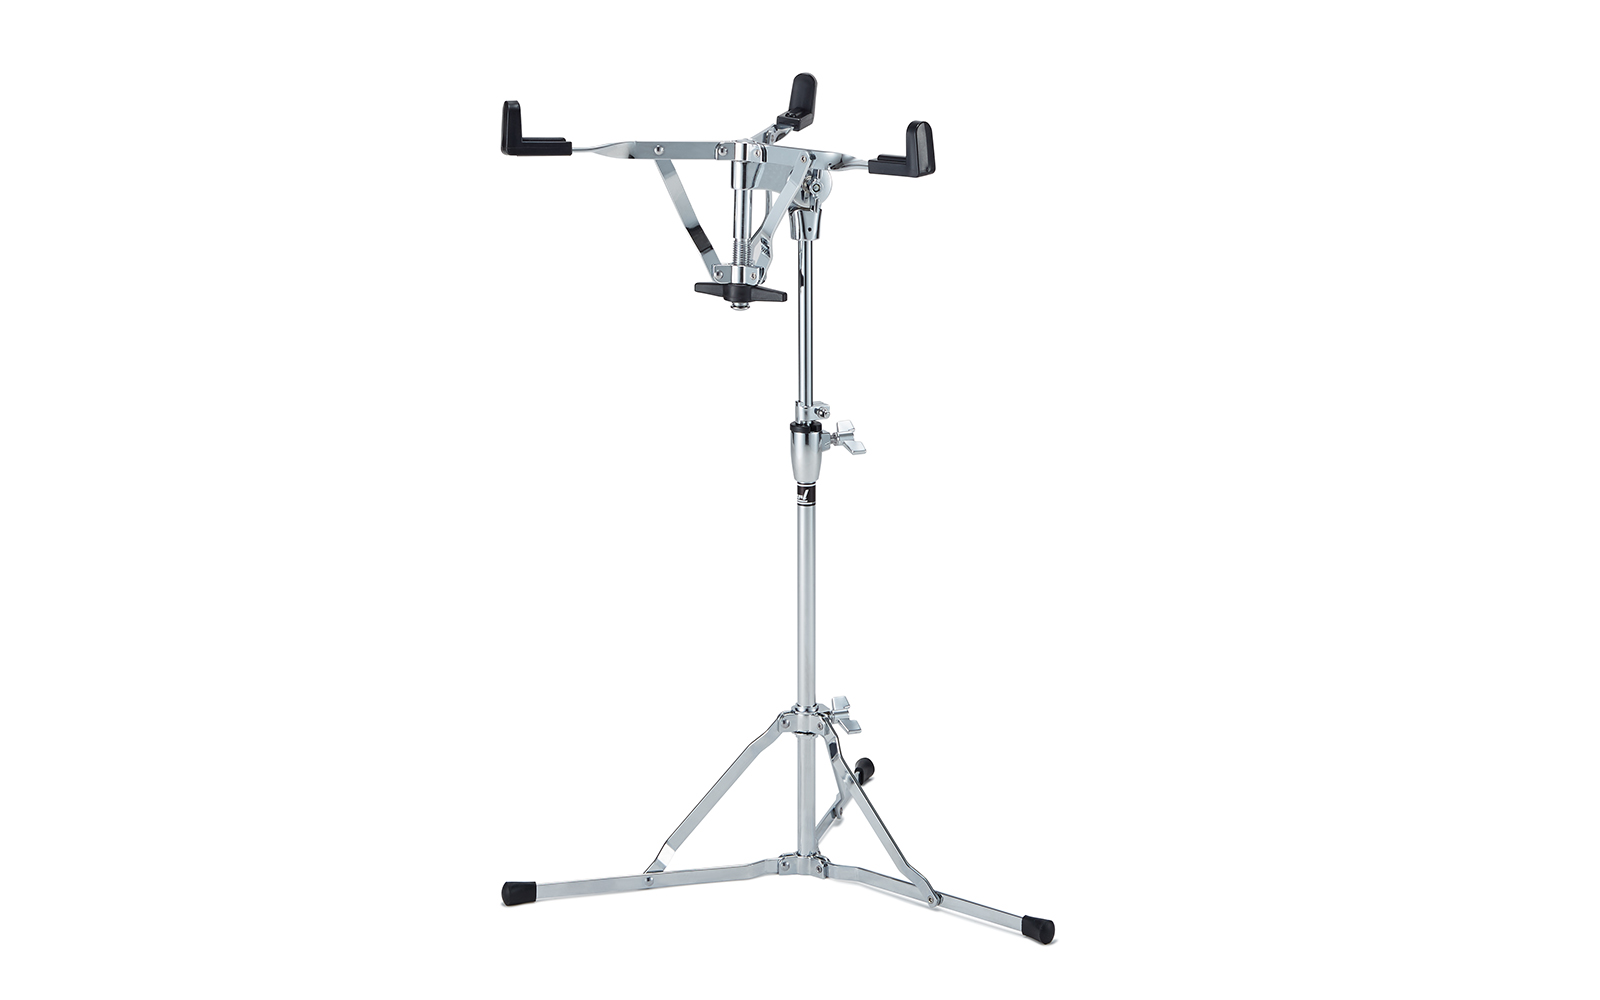 S-53SL Snare Stand | パール楽器【公式サイト】Pearl Drums